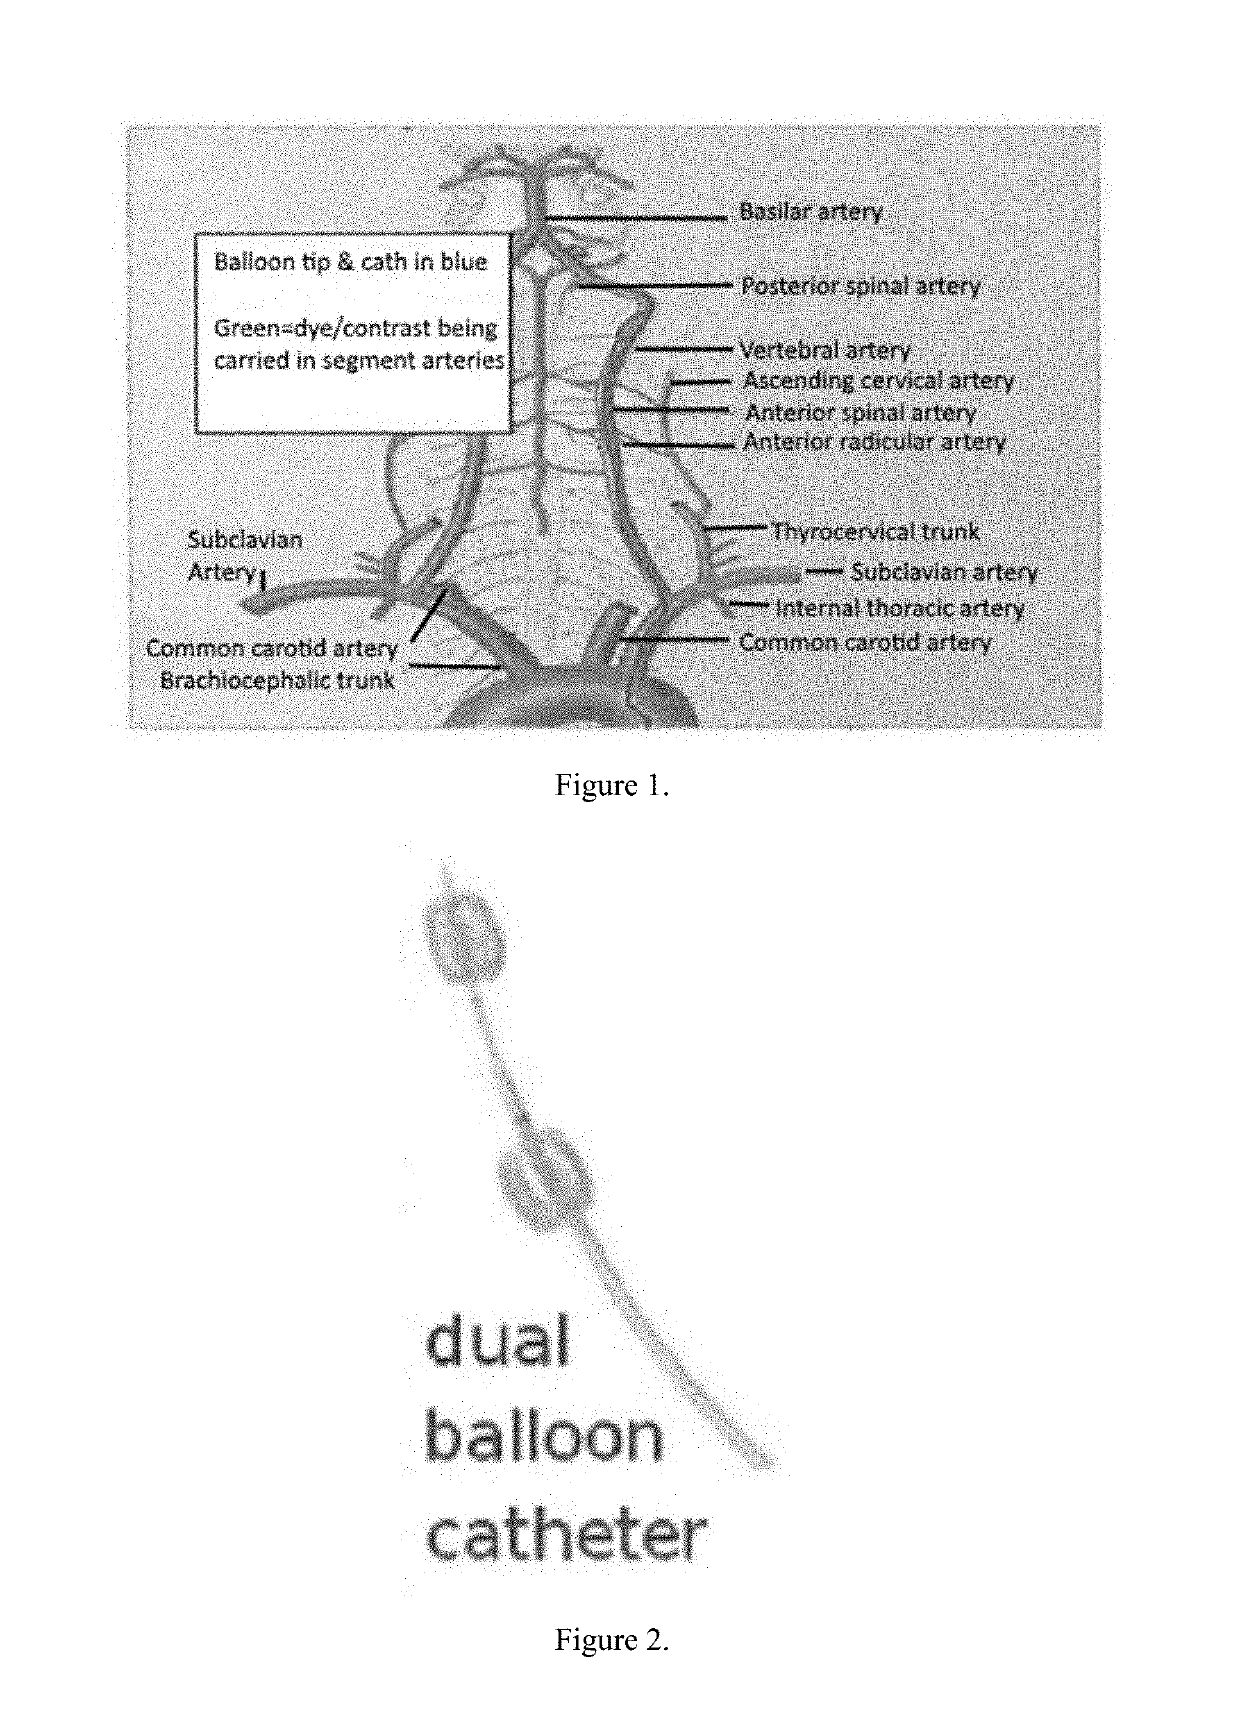 Non-invasive method for direct delivery of therapeutics to the spinal cord in the treatment of spinal cord pathology